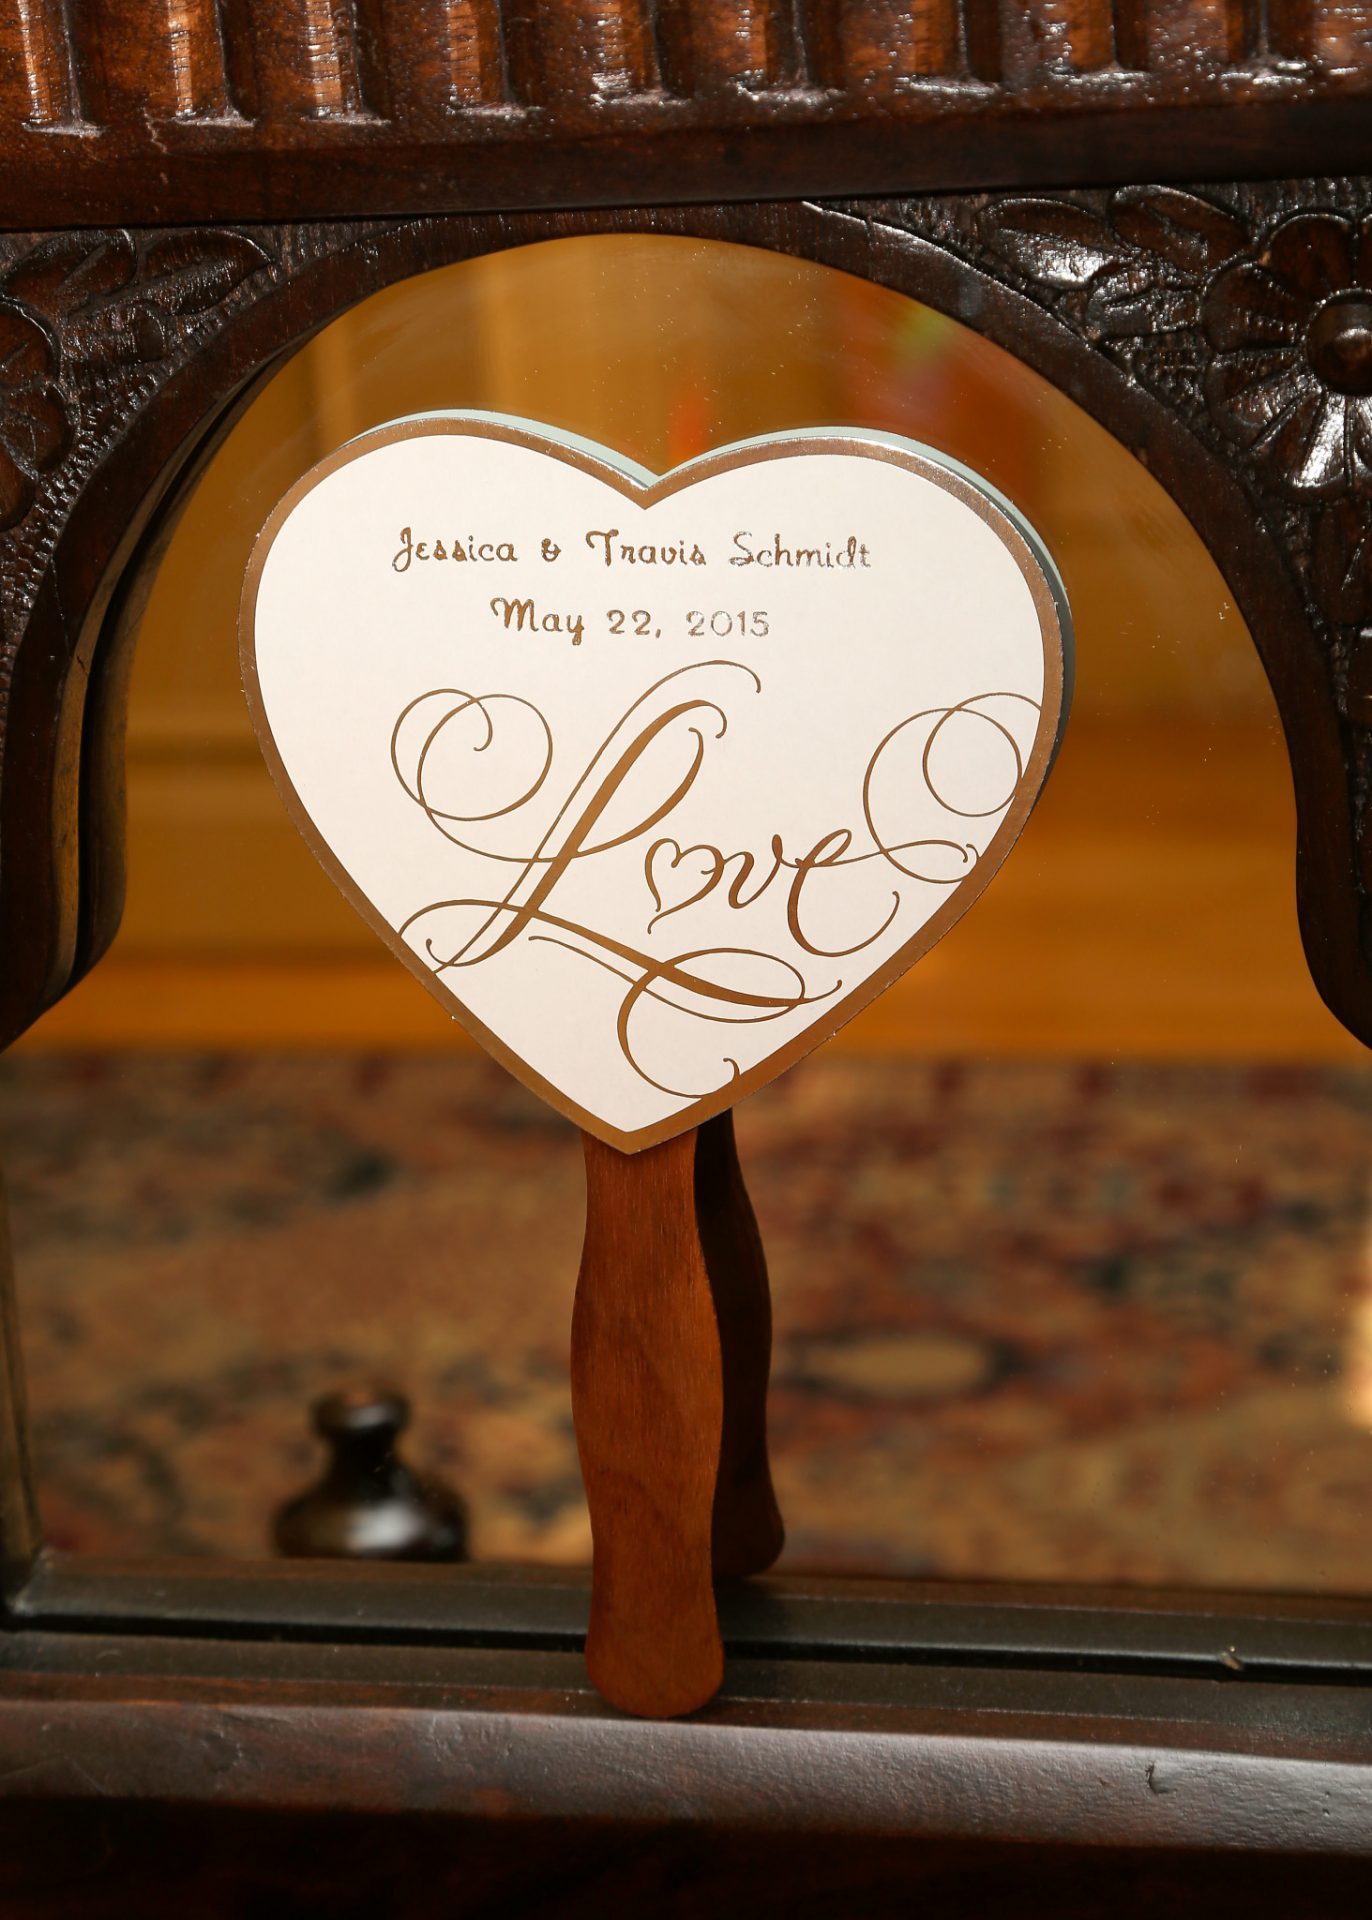 heart shaped fan used during outside wedding ceremony